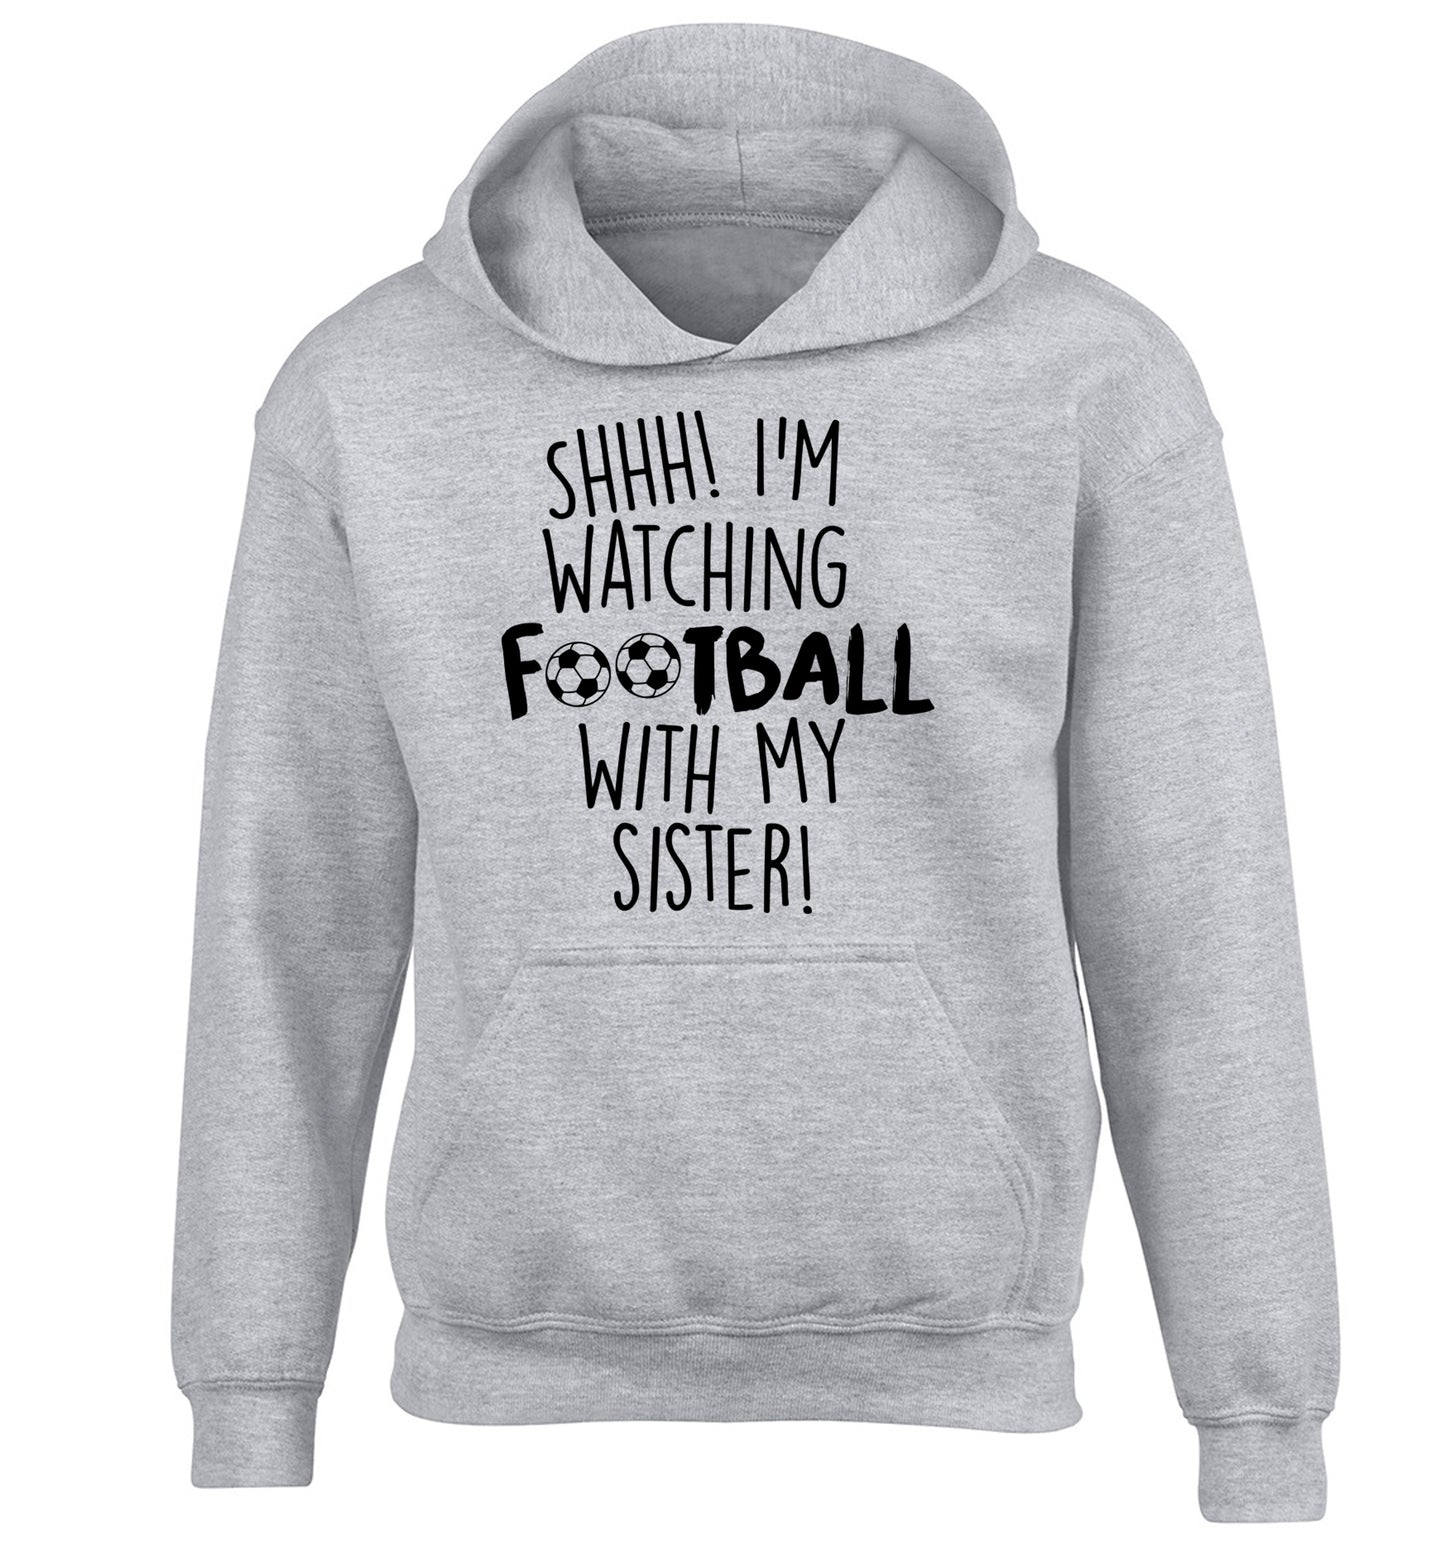 Shhh I'm watching football with my sister children's grey hoodie 12-14 Years